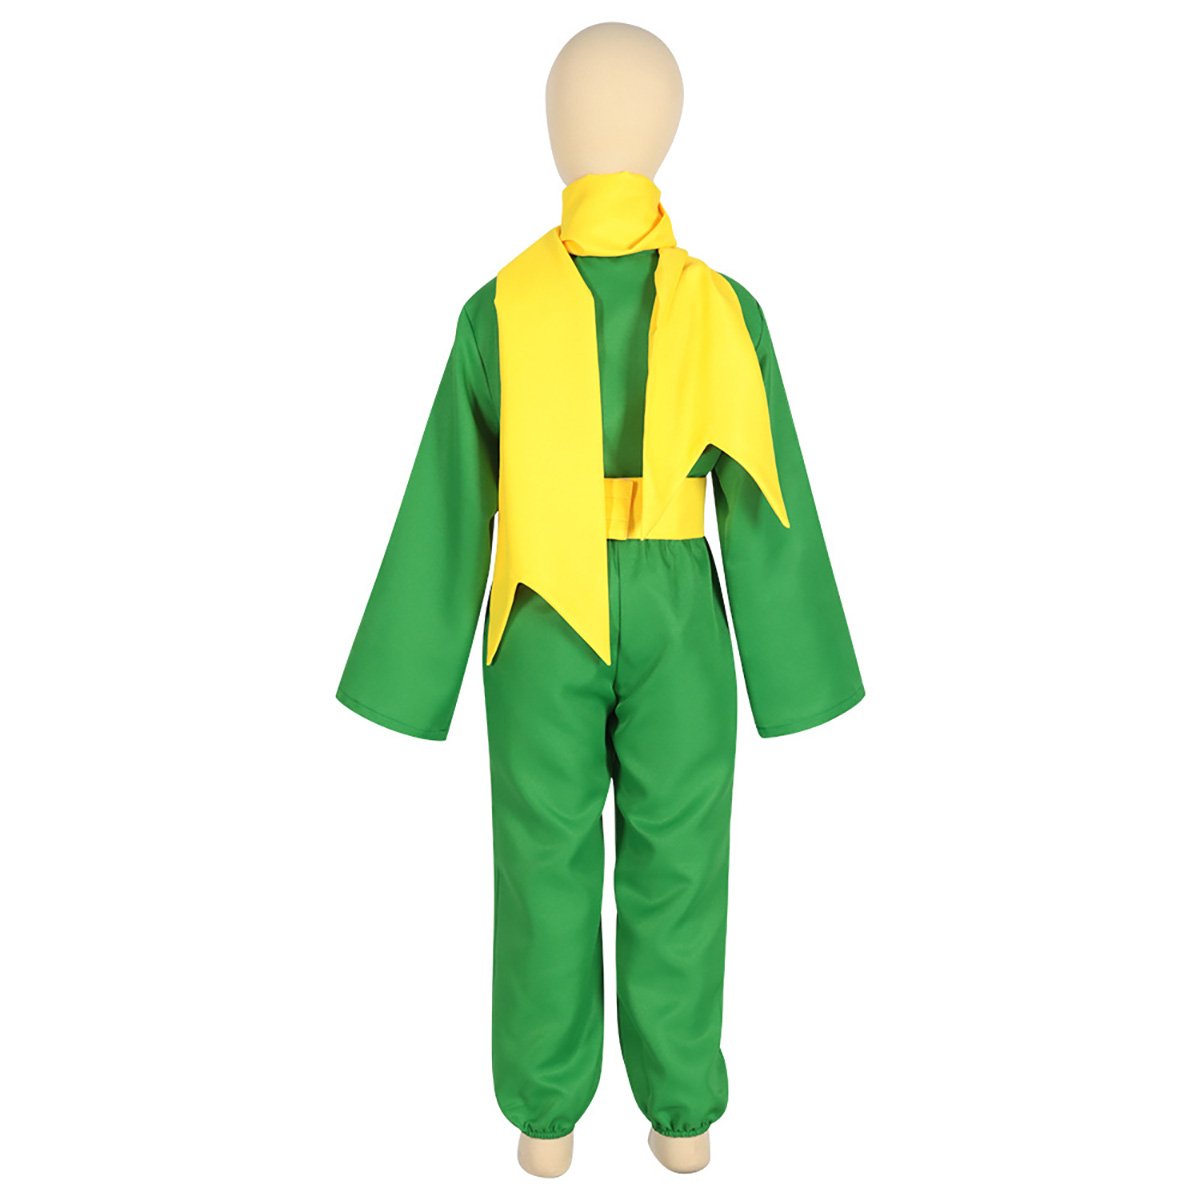 The Little Prince Cosplay Costume